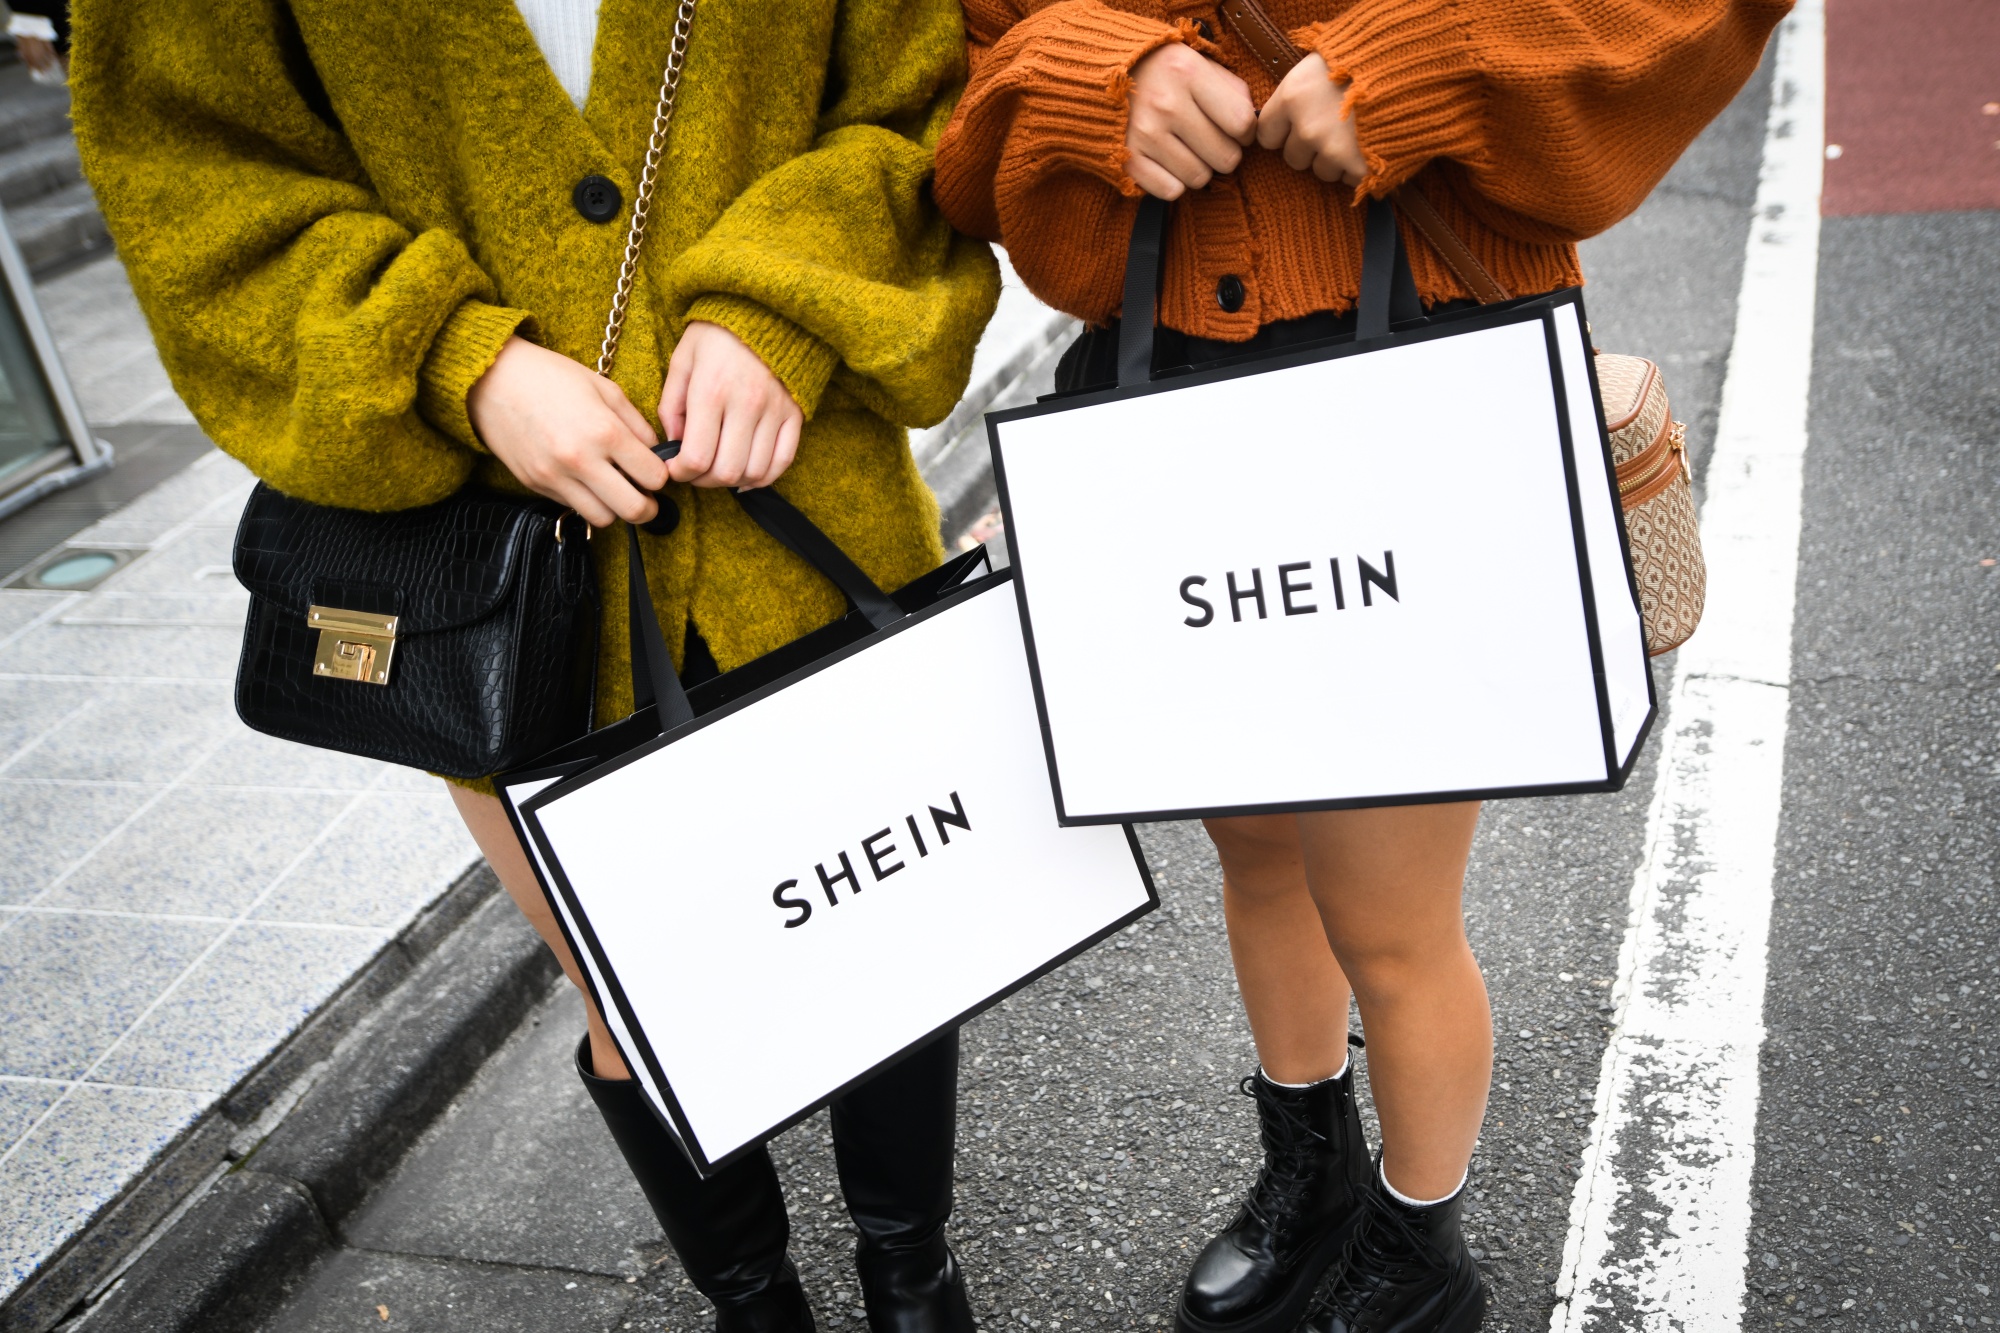 Shein Is the Most Popular Brand for TikTok Hauls, According to Study